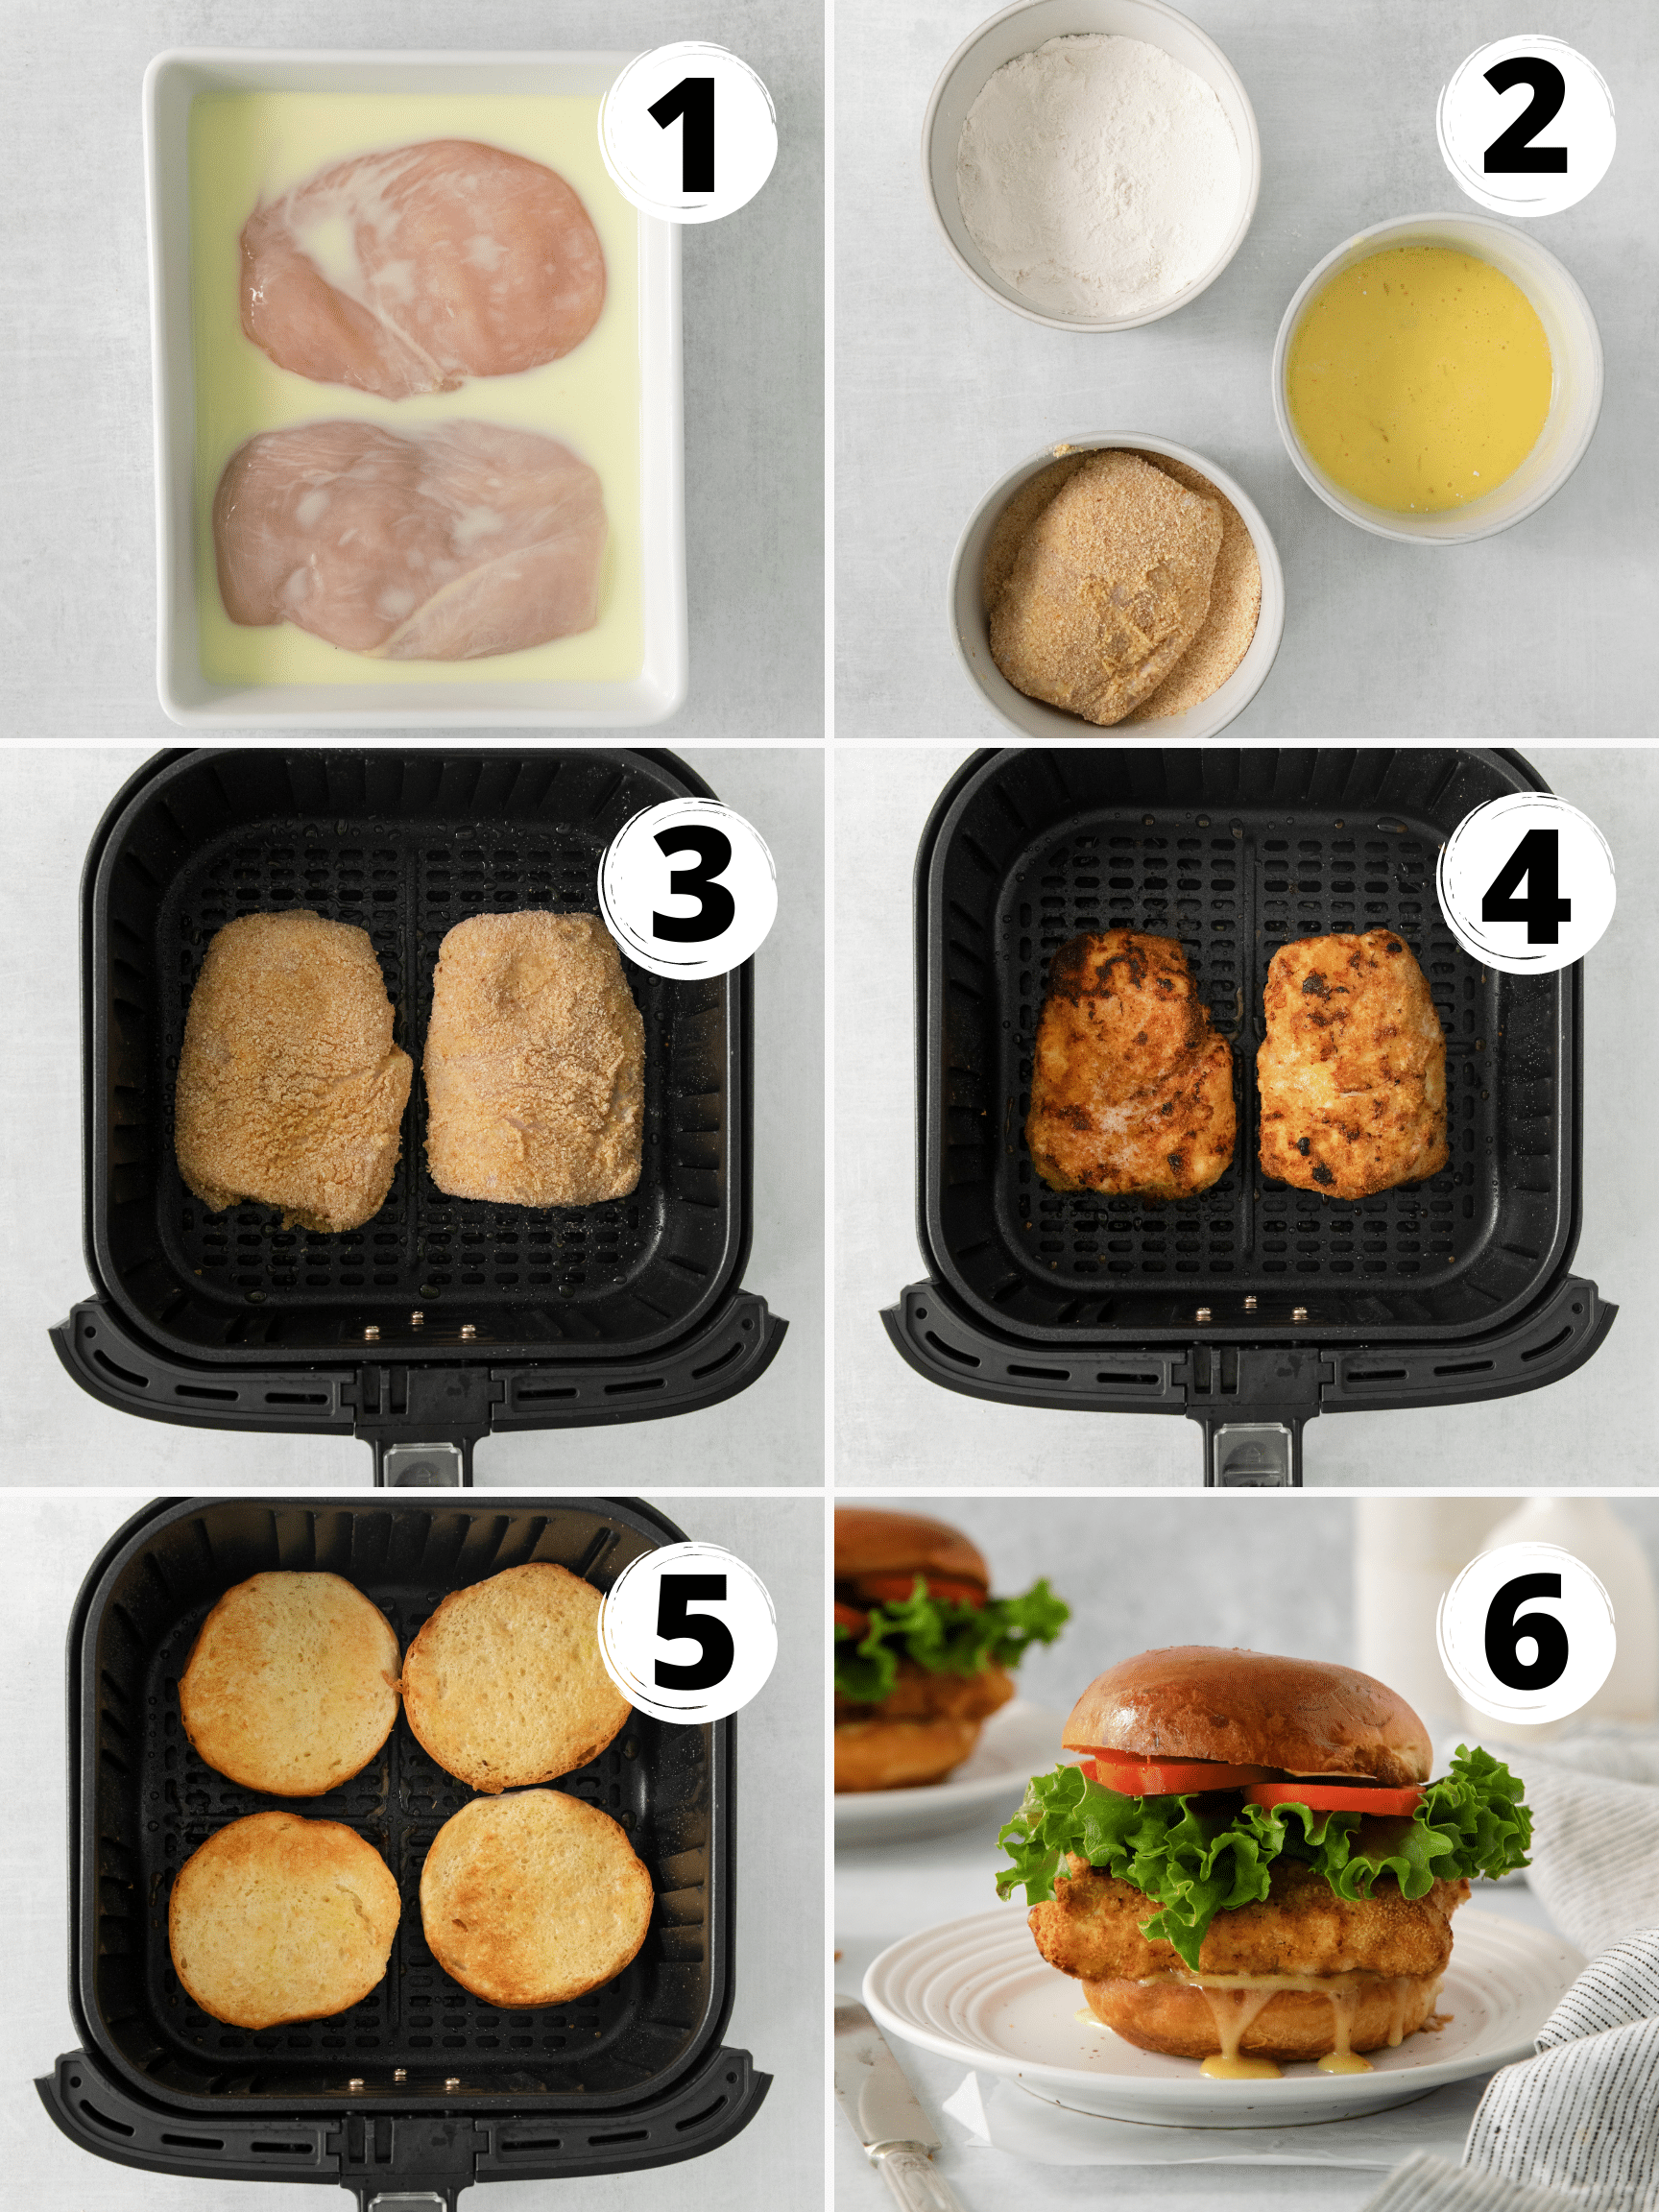 a collage of six images showing how to make chicken sandwiches using an air fryer.